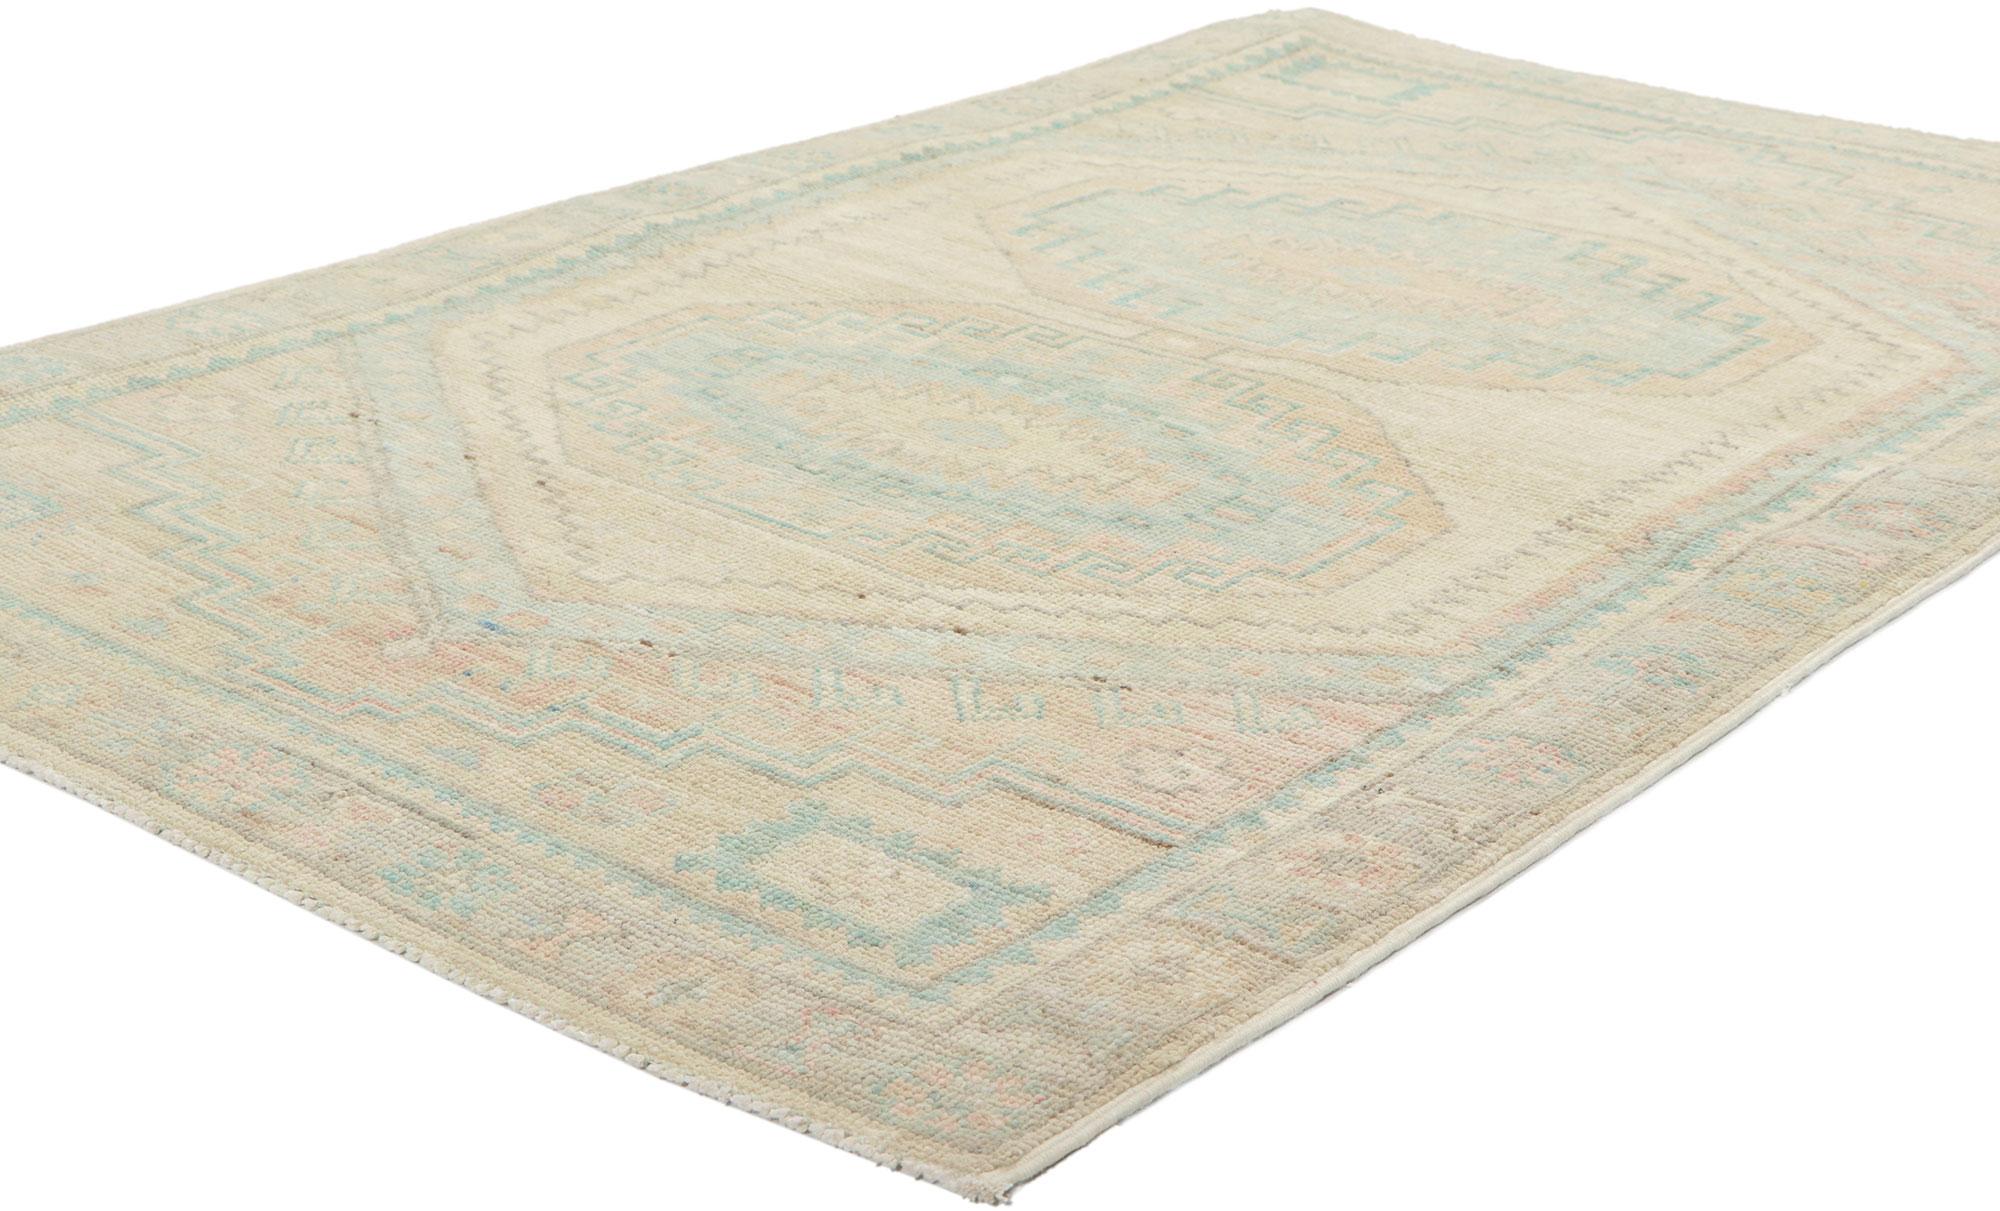 80848 New Modern Style Oushak Rug with Soft Colors, 03'03 x 05'01. Polished and playful, this hand-knotted wool contemporary Contemporary Oushak rug beautifully embodies a modern style. The composition features an all-over botanical pattern composed